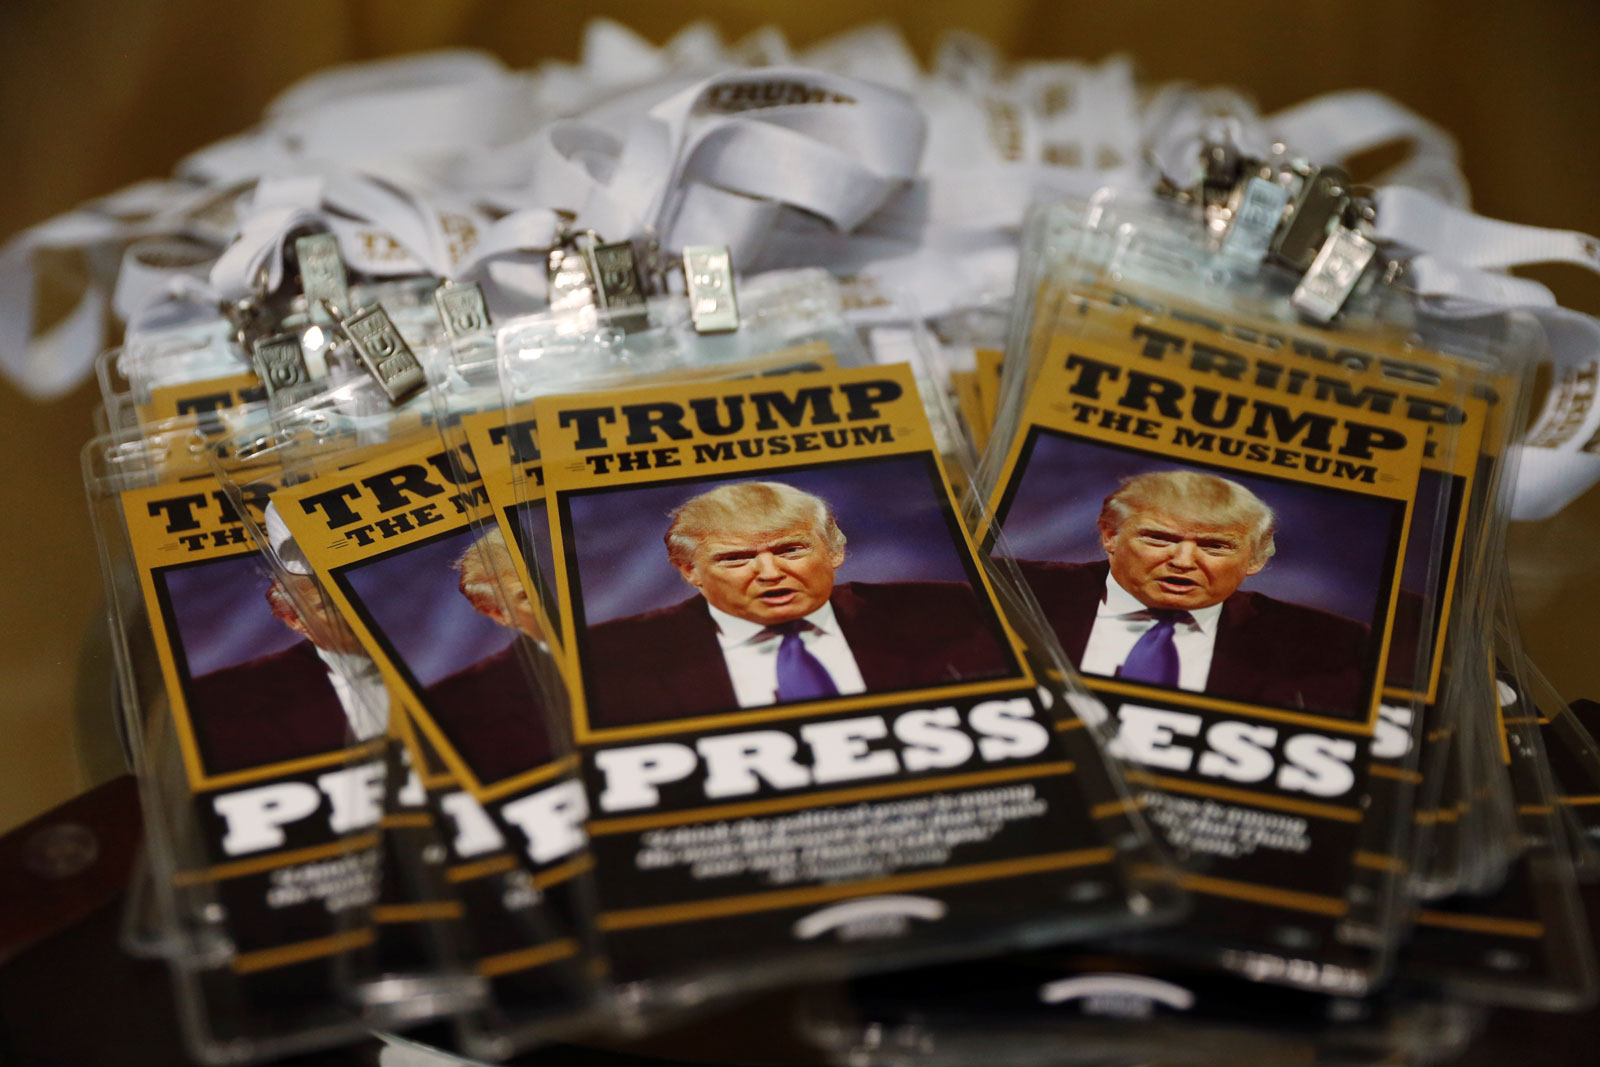 Press passes at an anti-Trump display near the Republican National Convention, Cleveland, Ohio, July 19, 2016